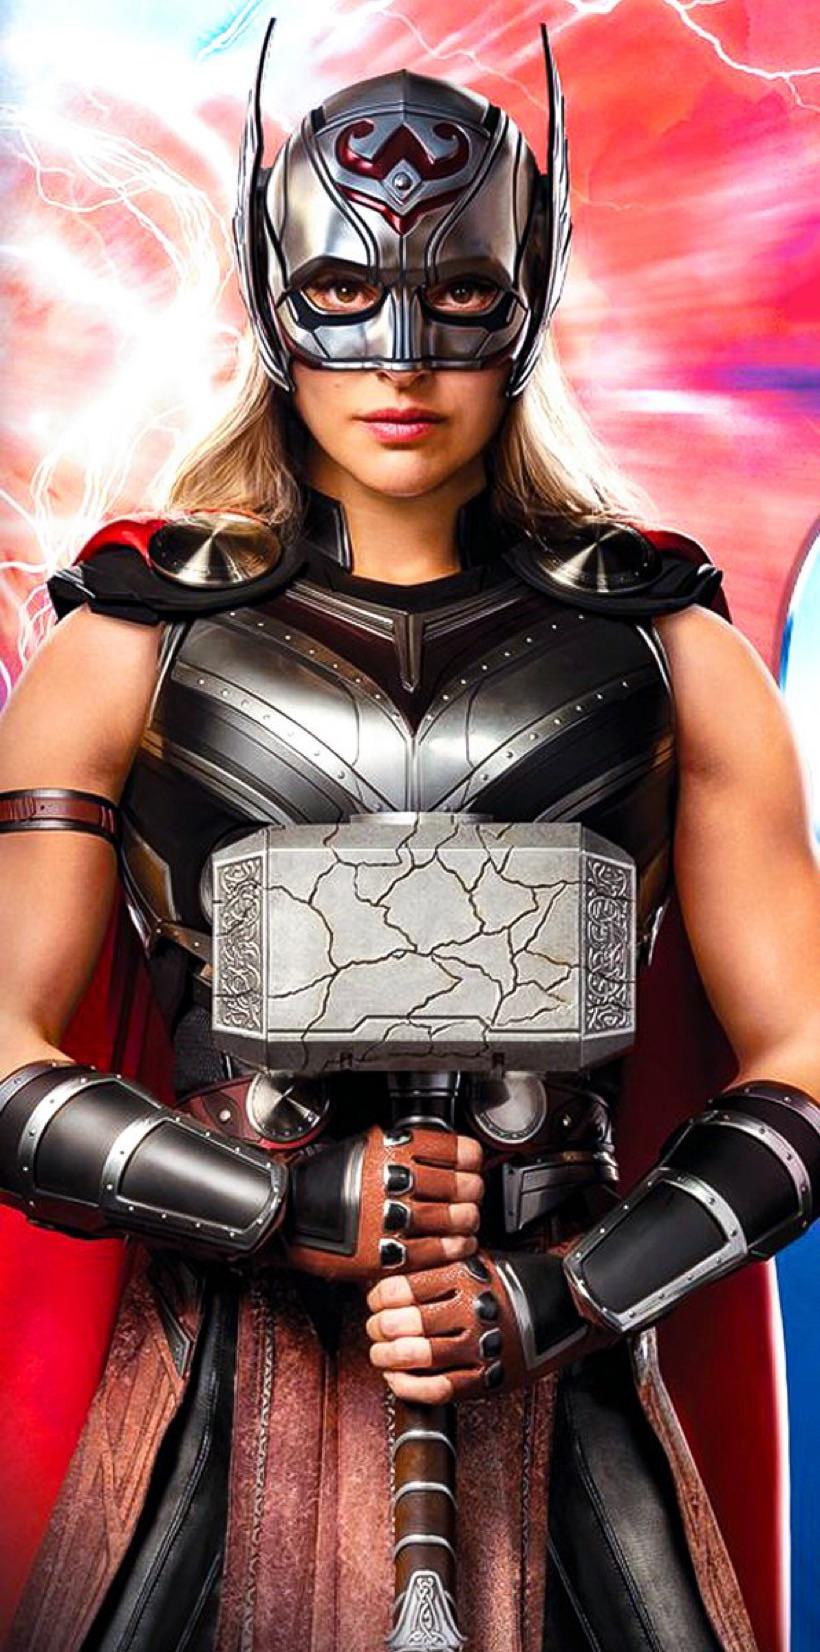 Here’s an official new promotional look at #MightyThor !